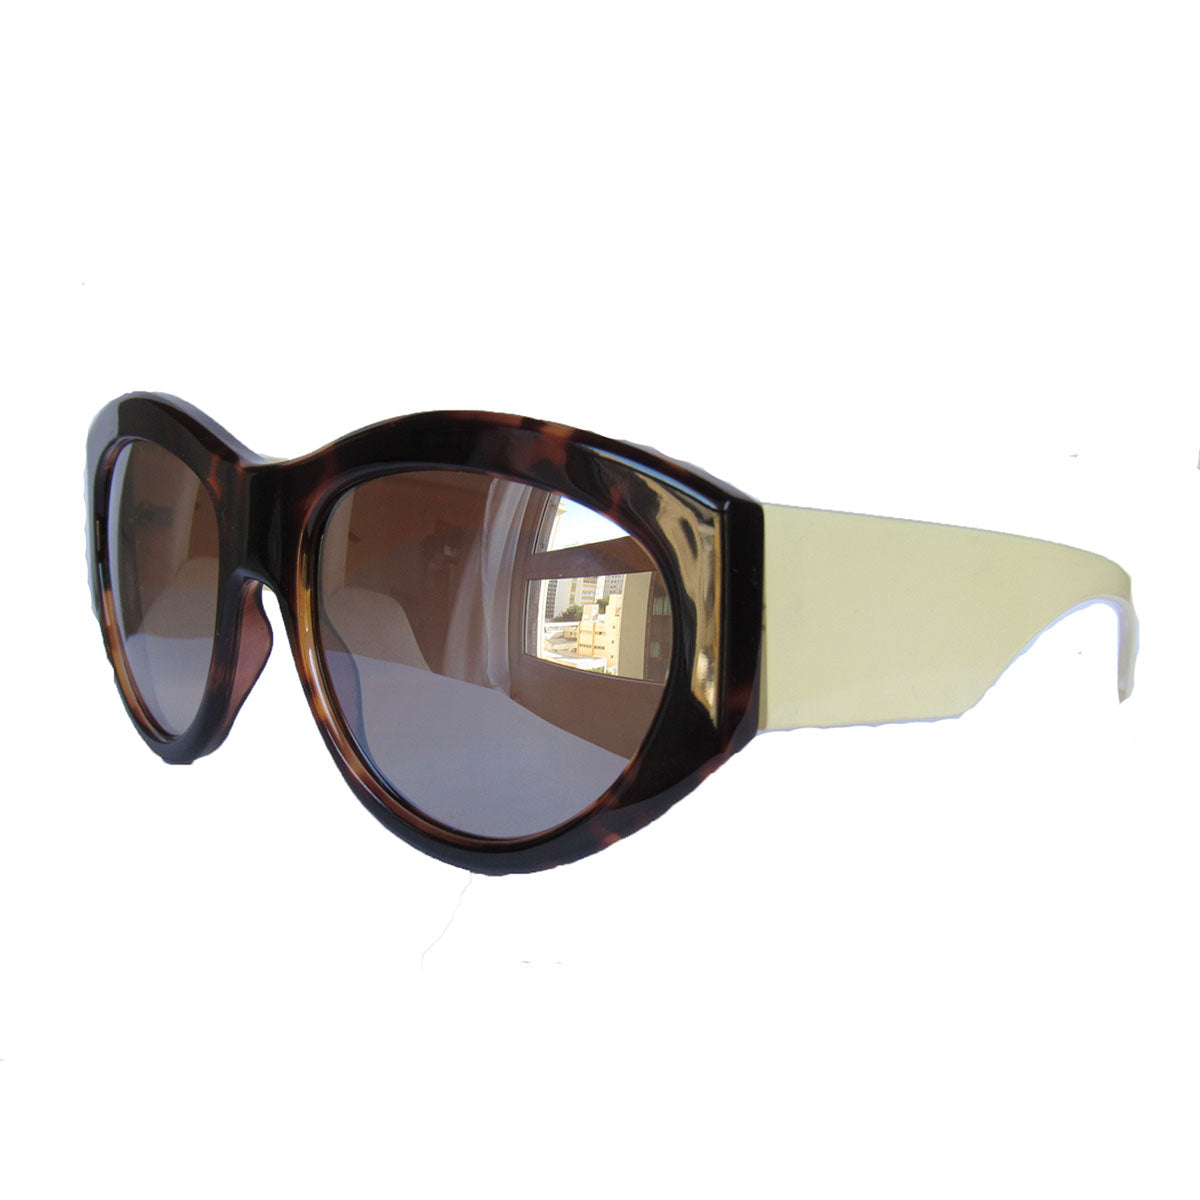 Mask Style Turtle Print Sunglasses w/ Ivory-Coloured Arms and Silver Mirrored Lenses